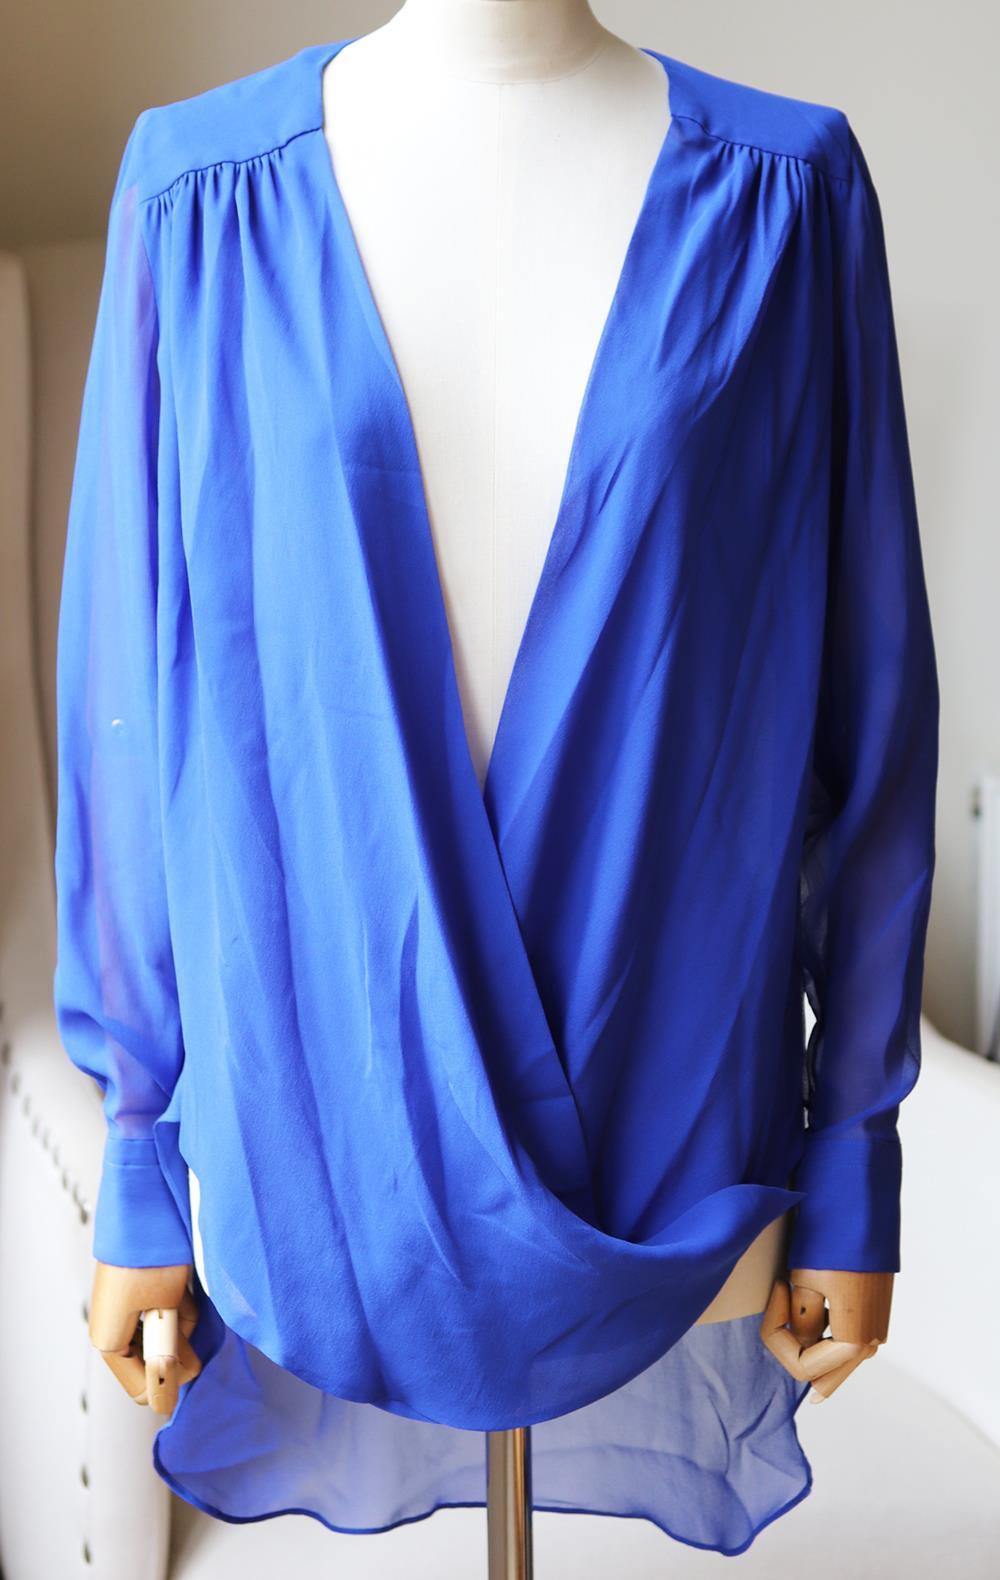 Cut to fall fluidly over the body, this semi-sheer silk shirt has an effortlessly draped collar. 
Blue silk. 
Push button fastening along side. 
100% Silk.

Size: IT 38 (UK 6, US 2, FR 34)

Condition: No sign of wear